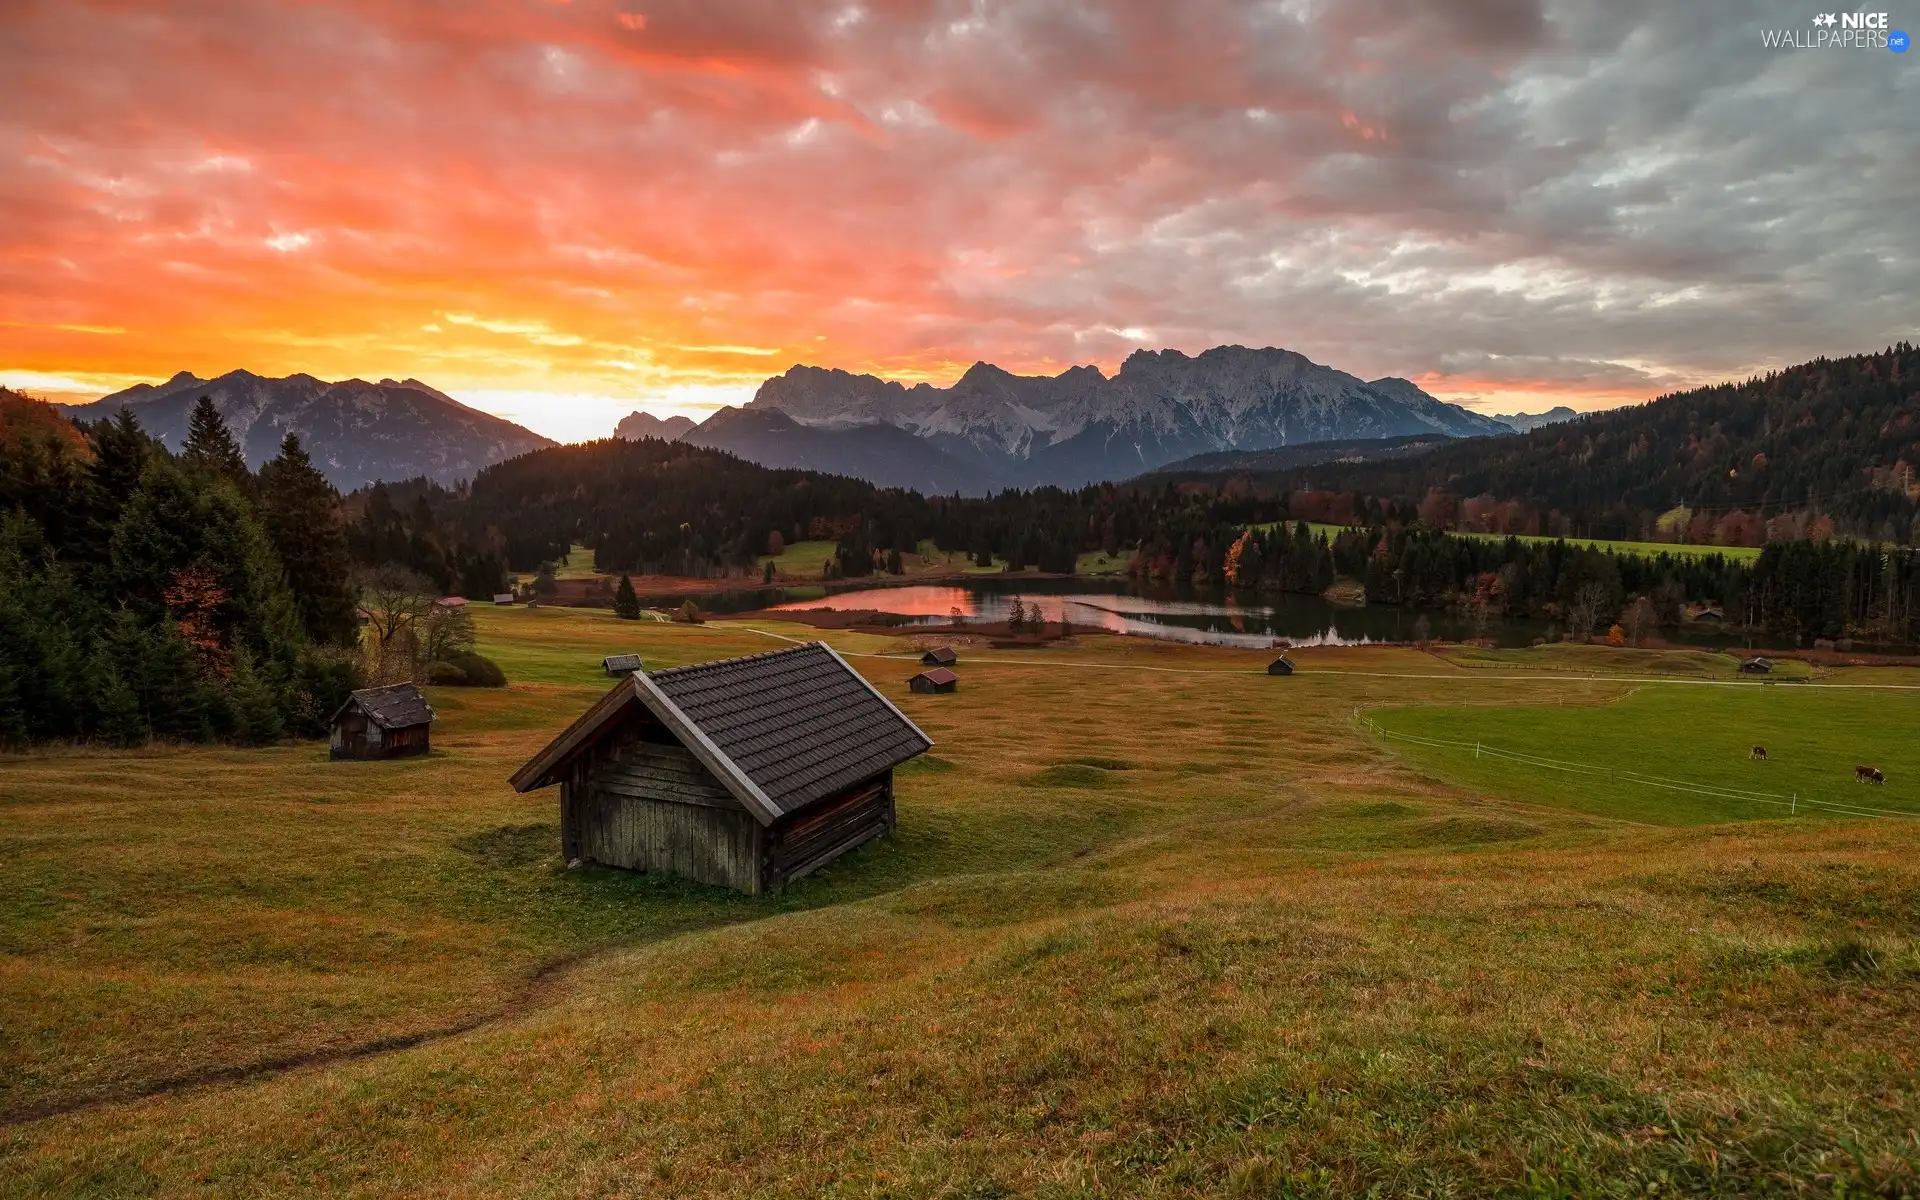 clouds, car in the meadow, Great Sunsets, viewes, trees, Bavaria, Houses, Karwendel Mountains, Germany, Sheds, woods, Geroldsee Lake